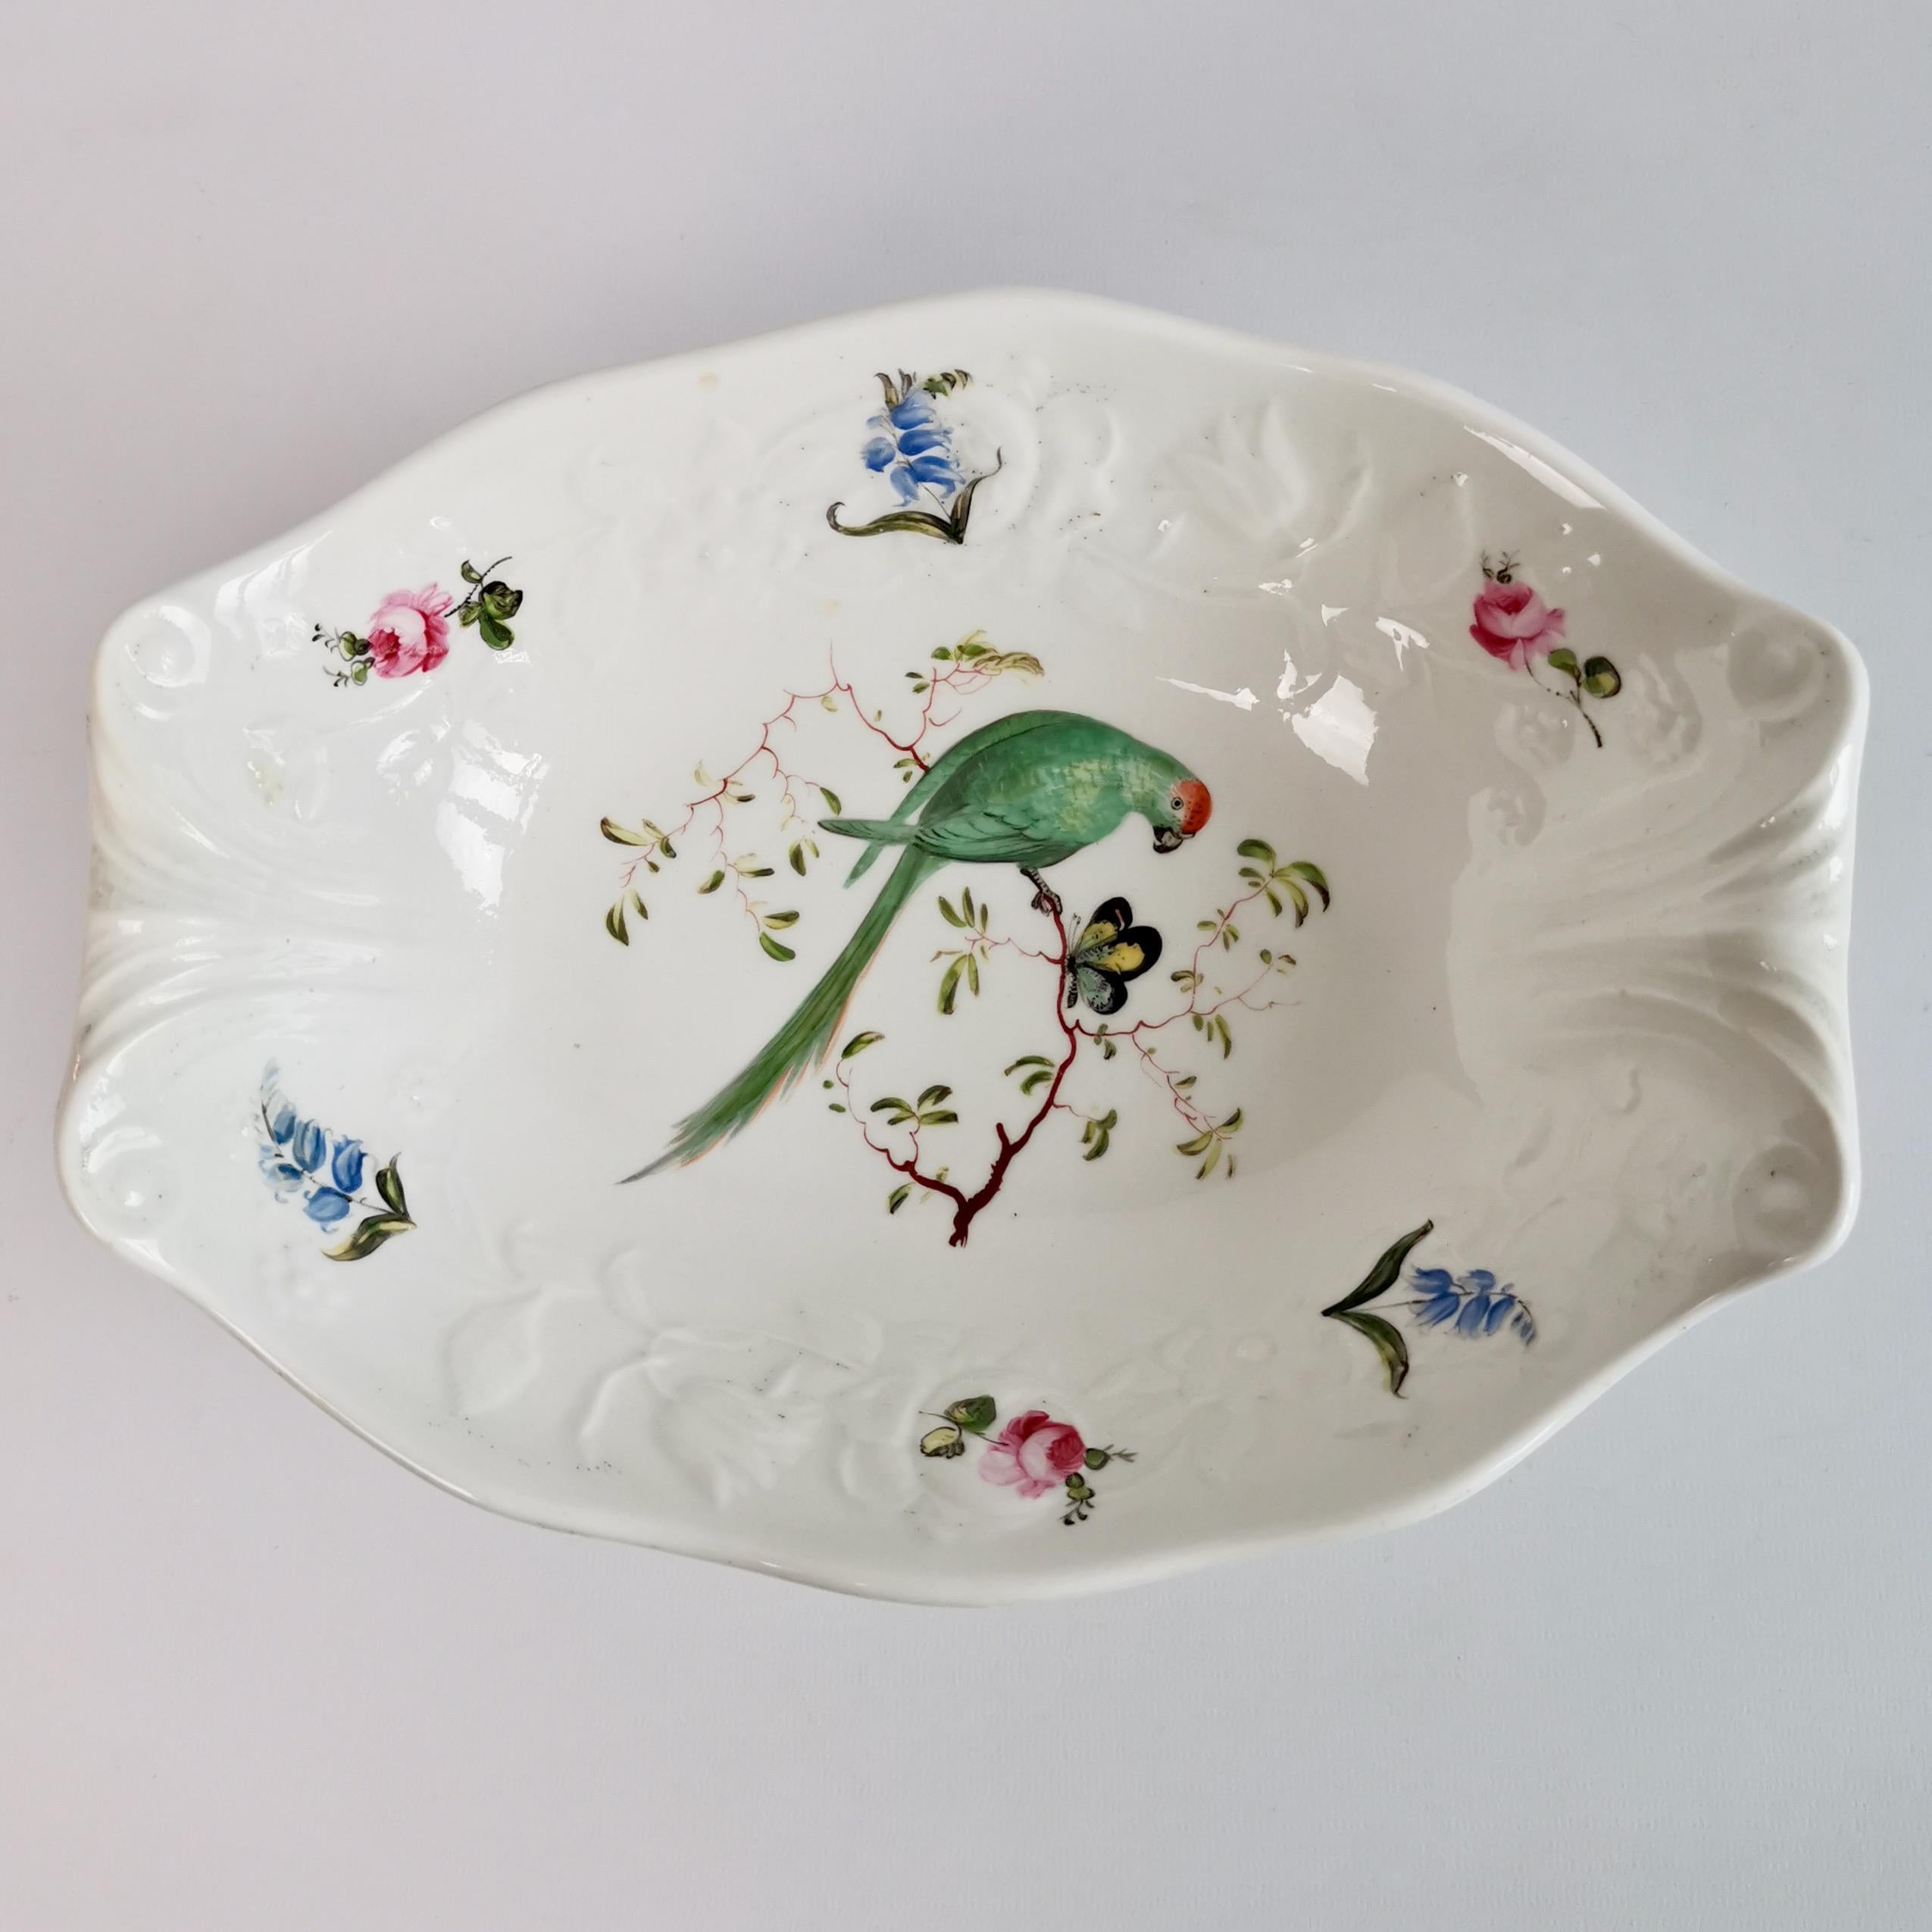 English Mayer & Newbold Porcelain Comport, White with Exotic Birds, Regency, ca 1820